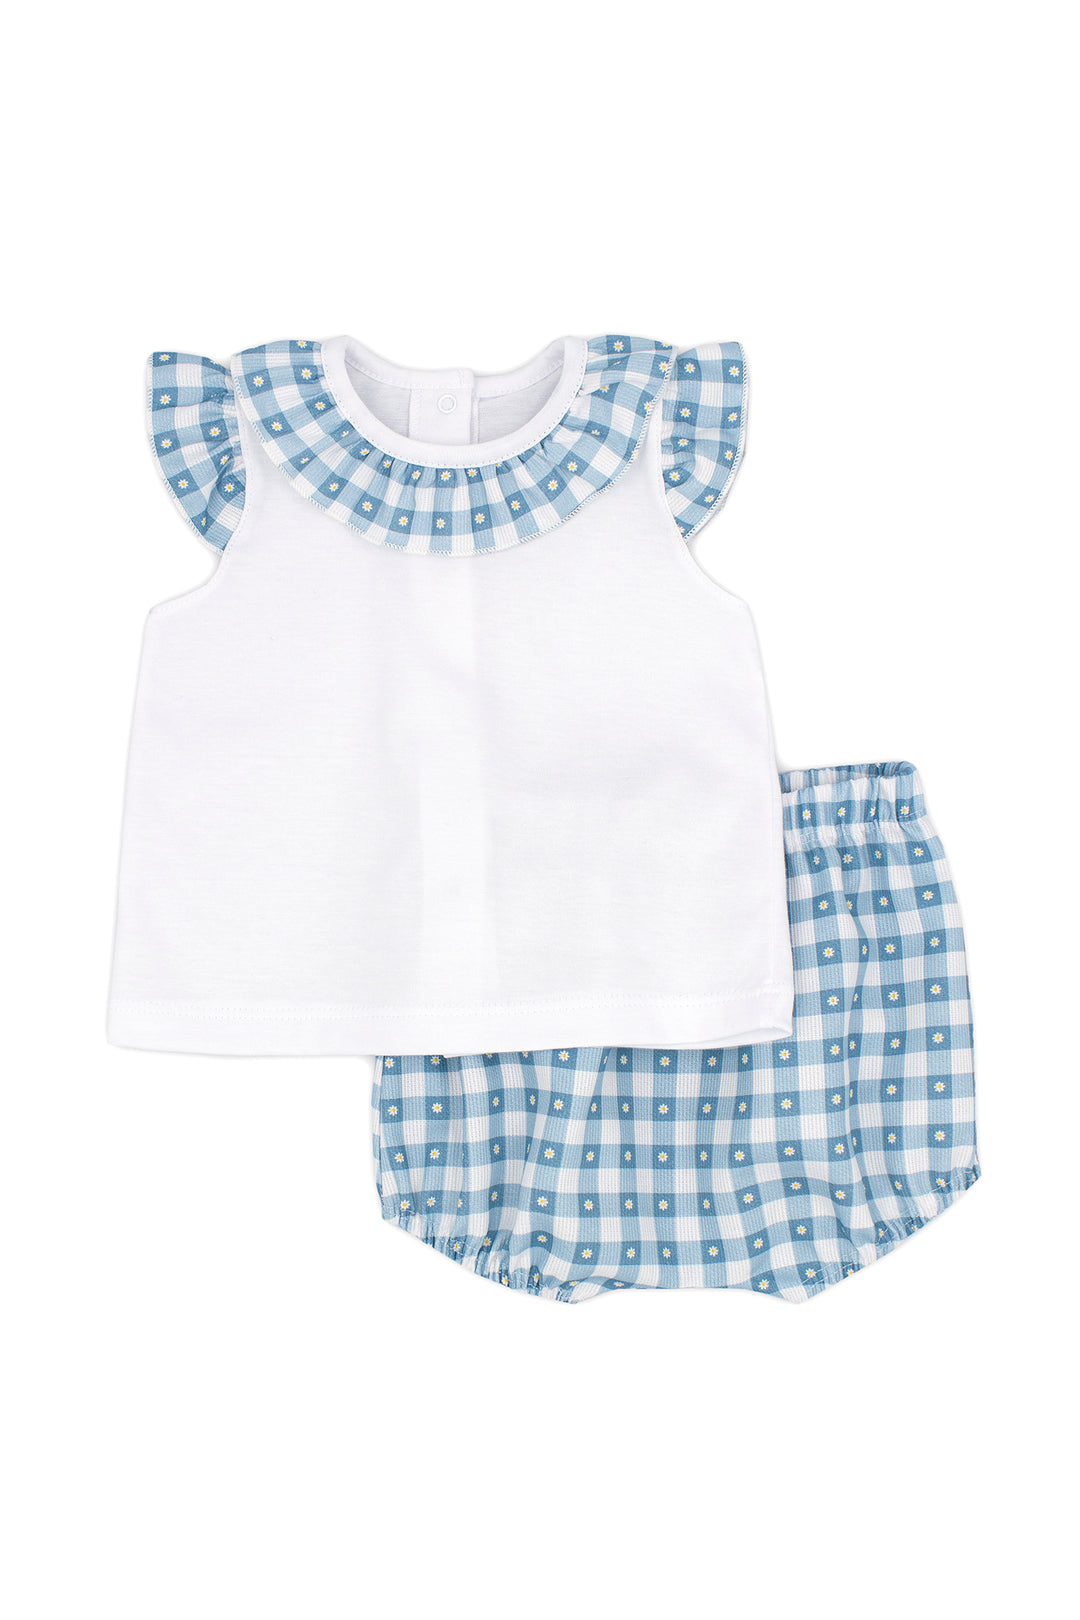 Rapife "Danica" Teal Gingham Top & Bloomers | Millie and John